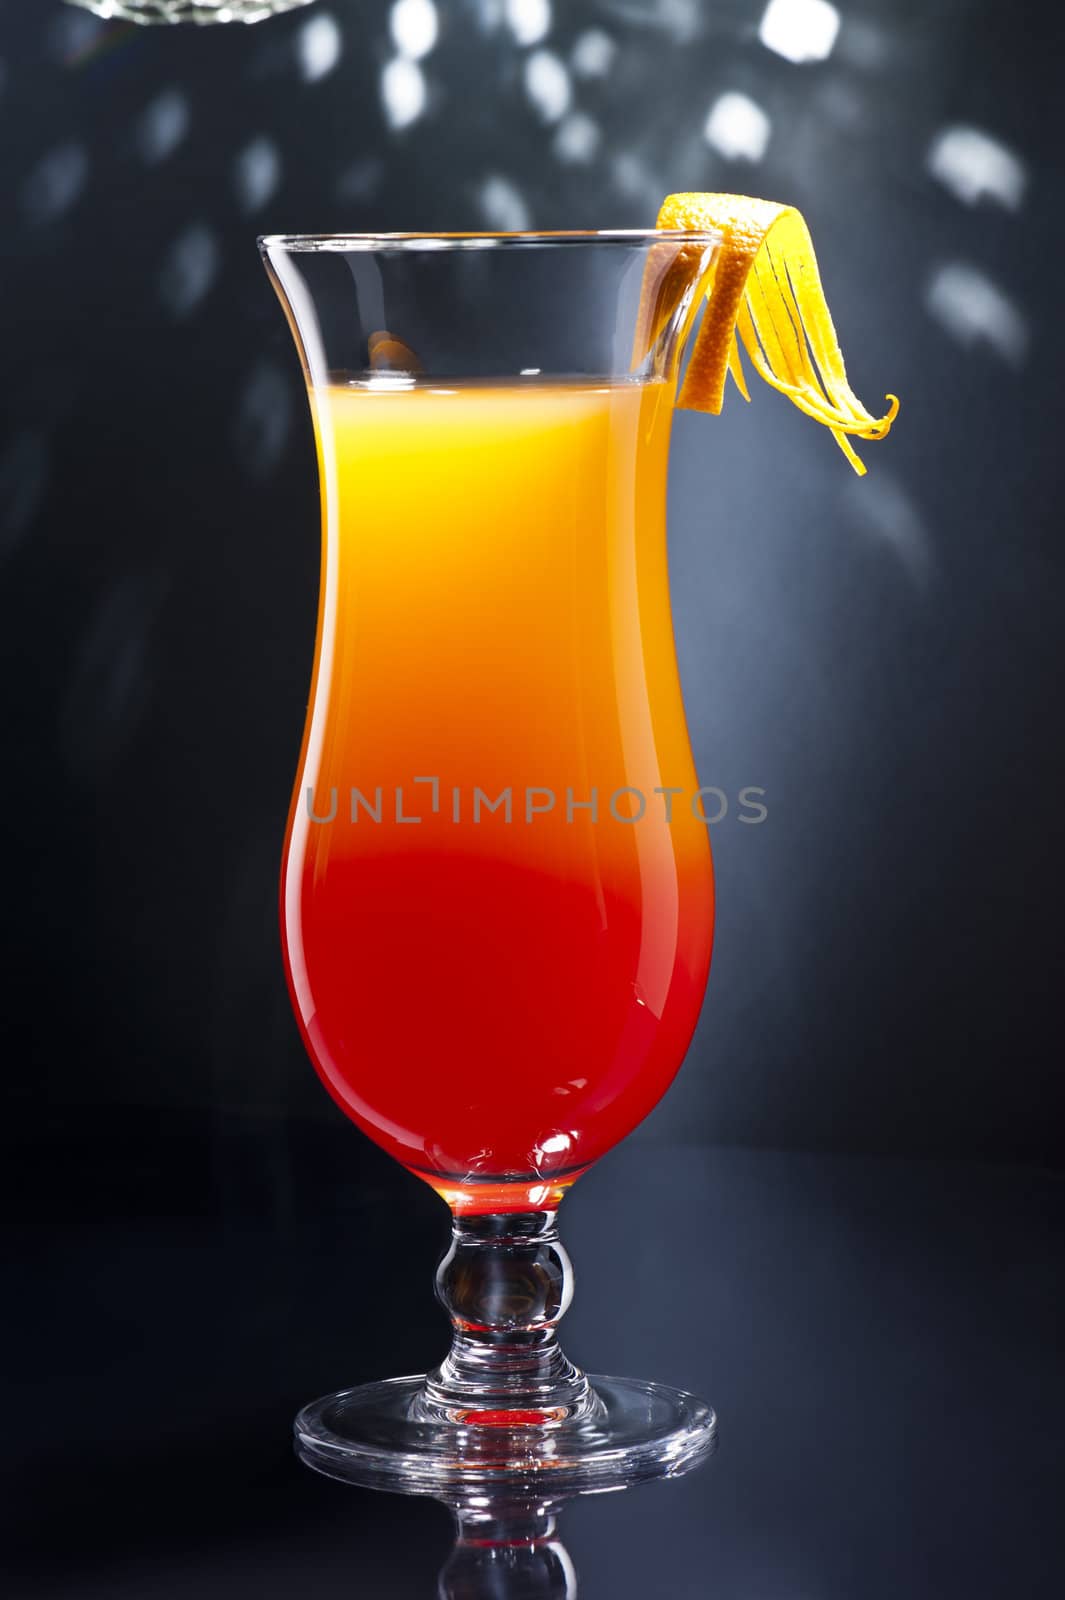 Tequila Sunrise cocktail by 3523Studio